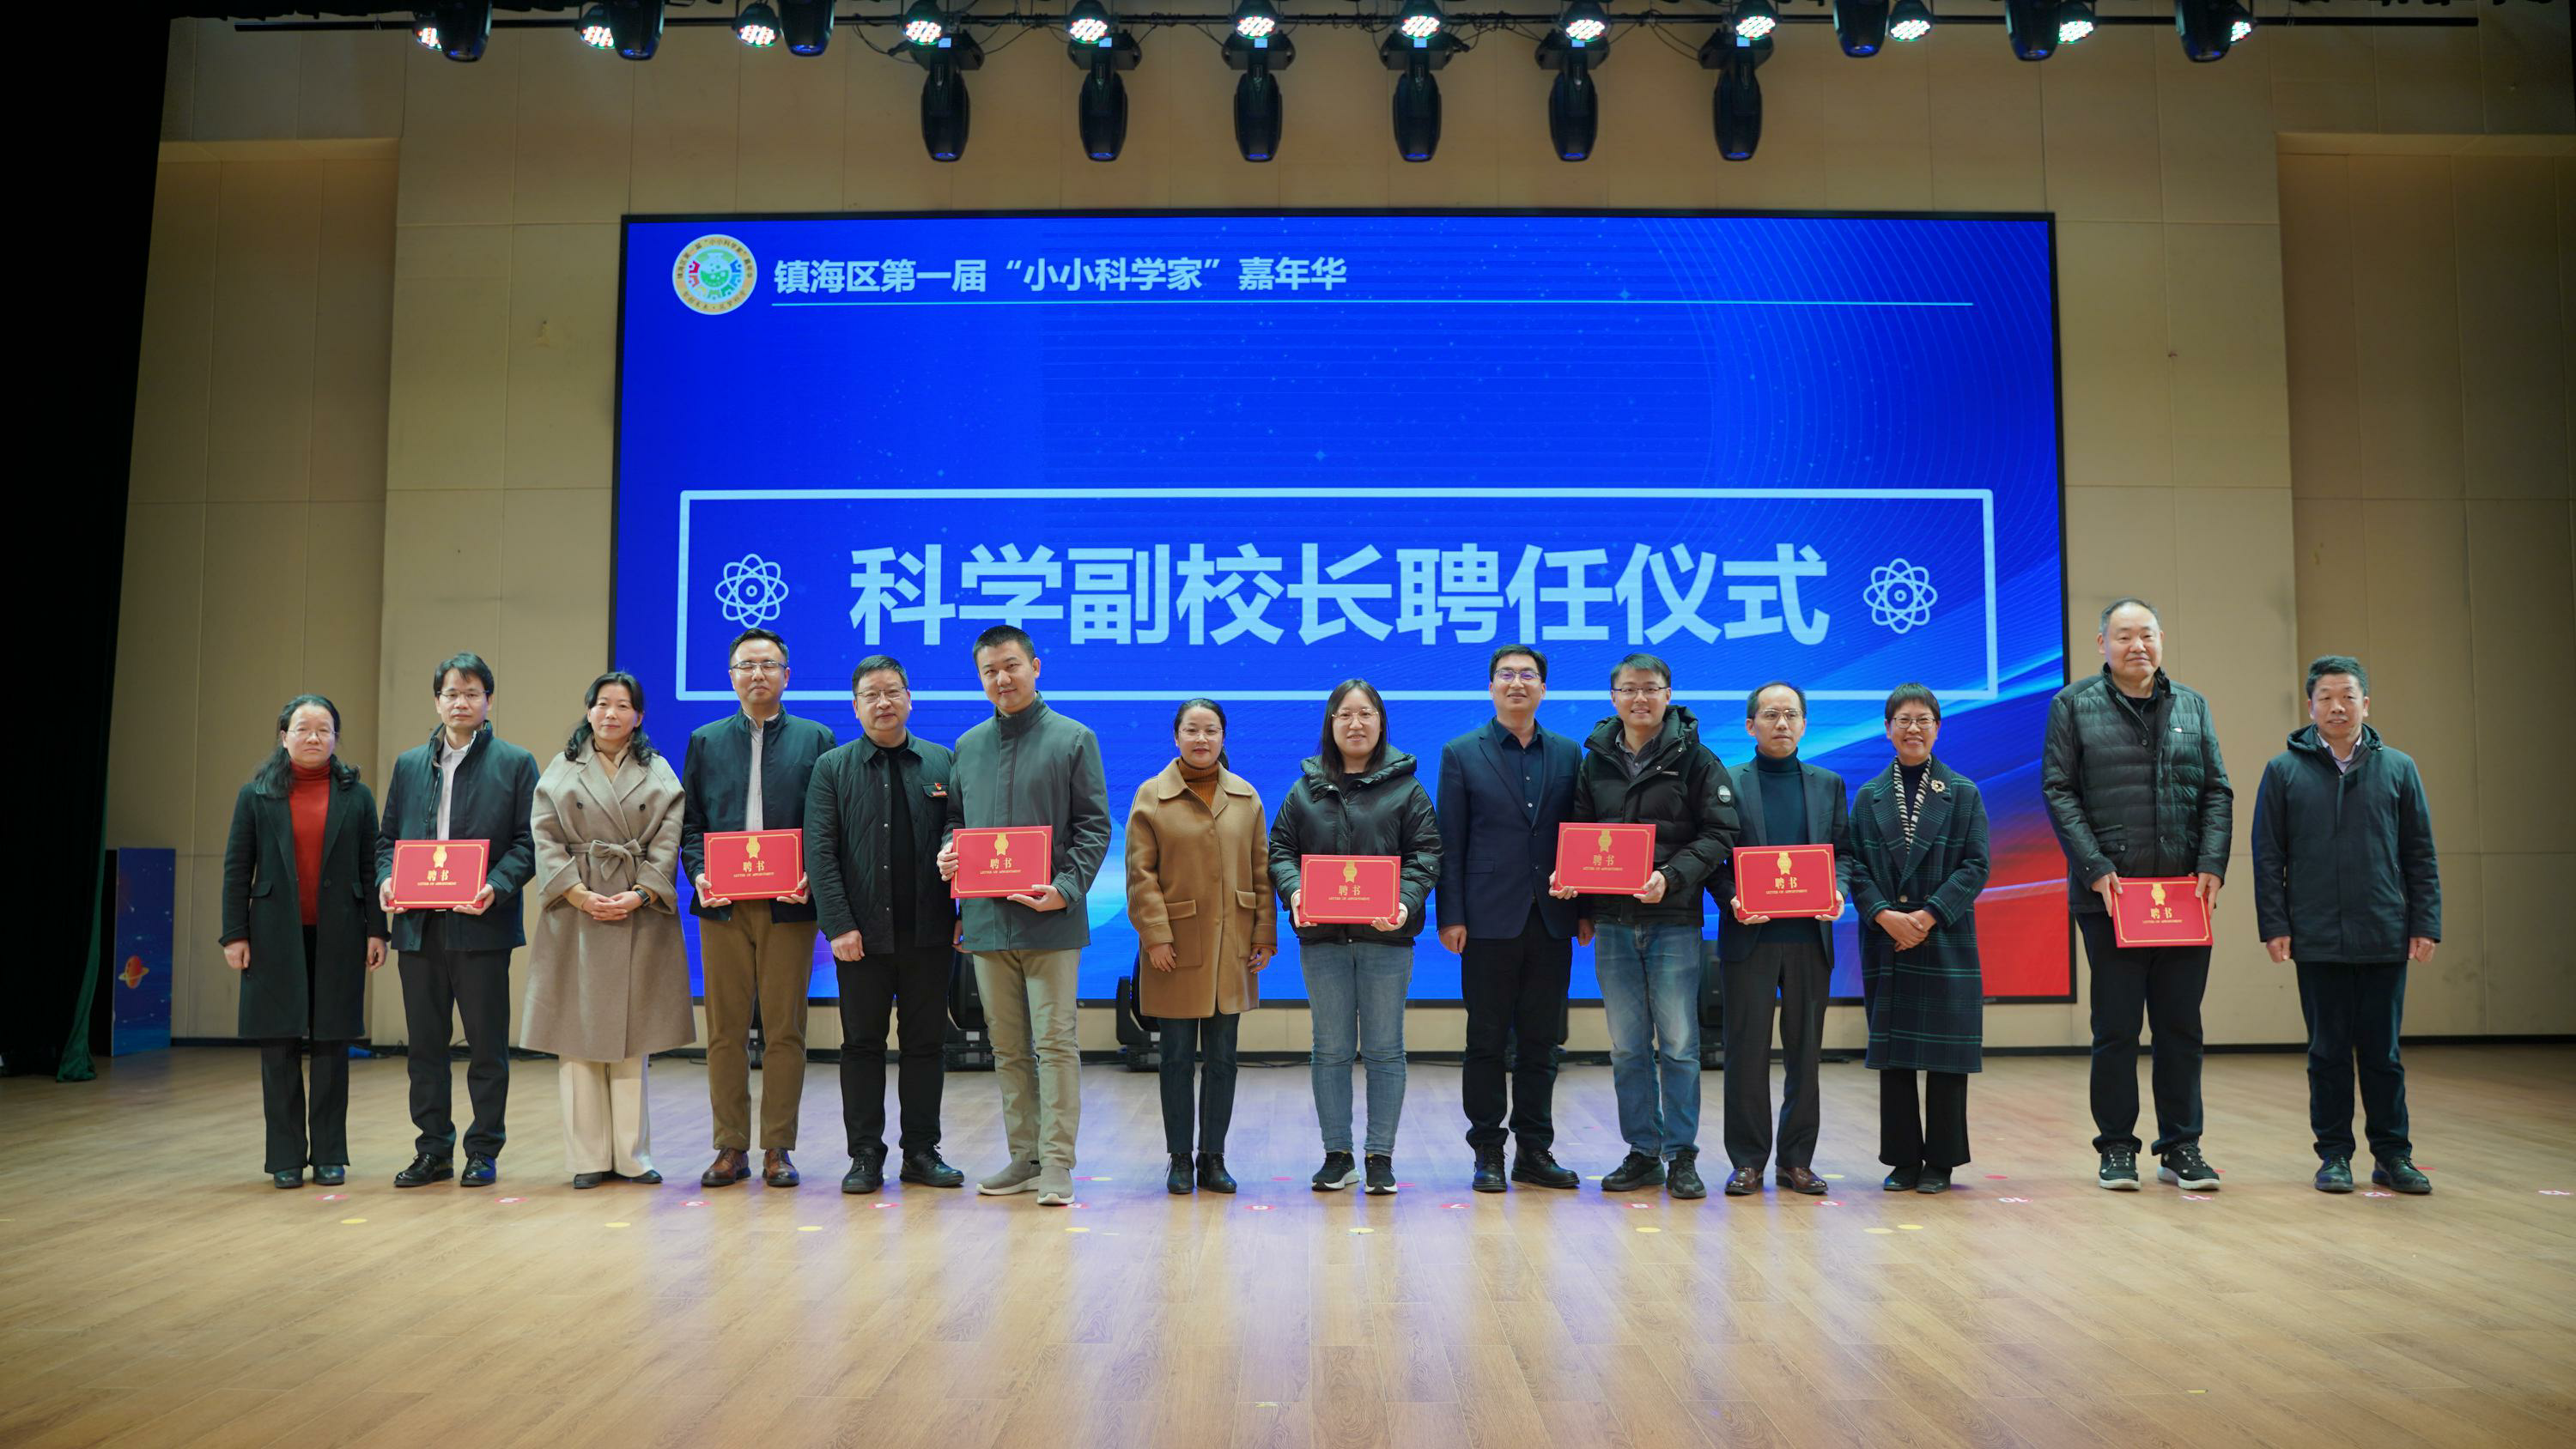 Zhejiang will organize thousands of scientists to serve as vice president of primary and secondary school science